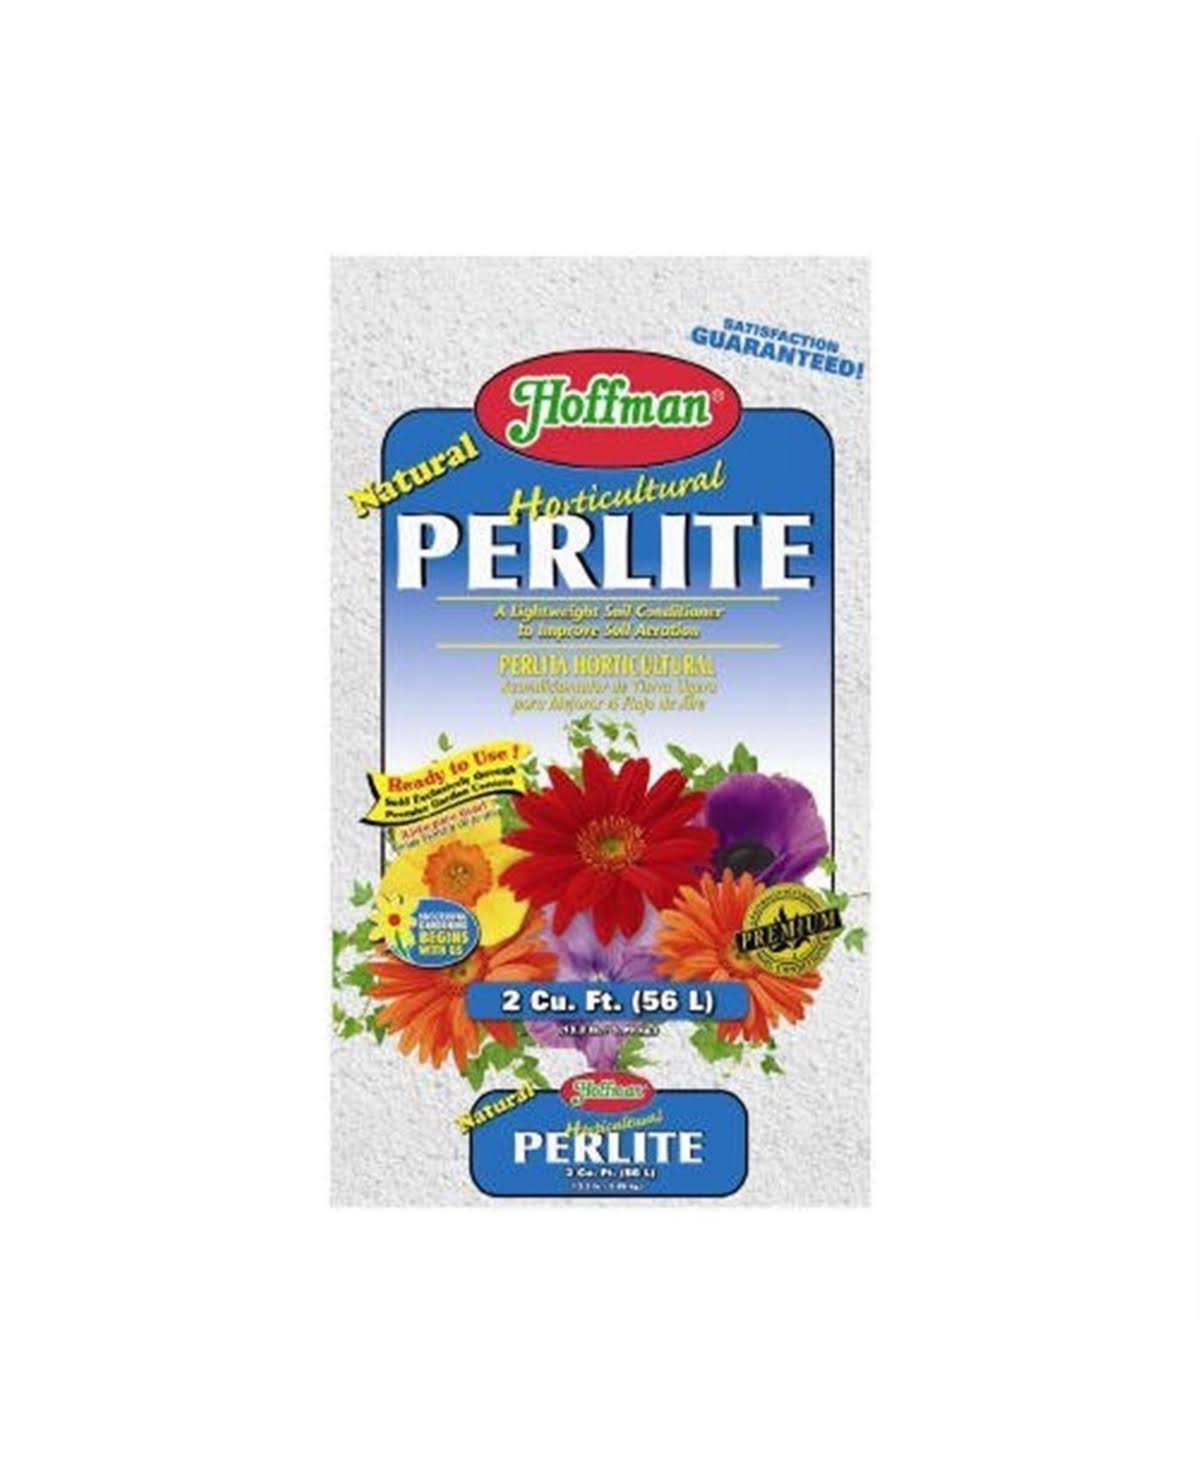 Good Earth Hoffman Horticultural Perlite Soil Conditioner - 2 Cubic Feet